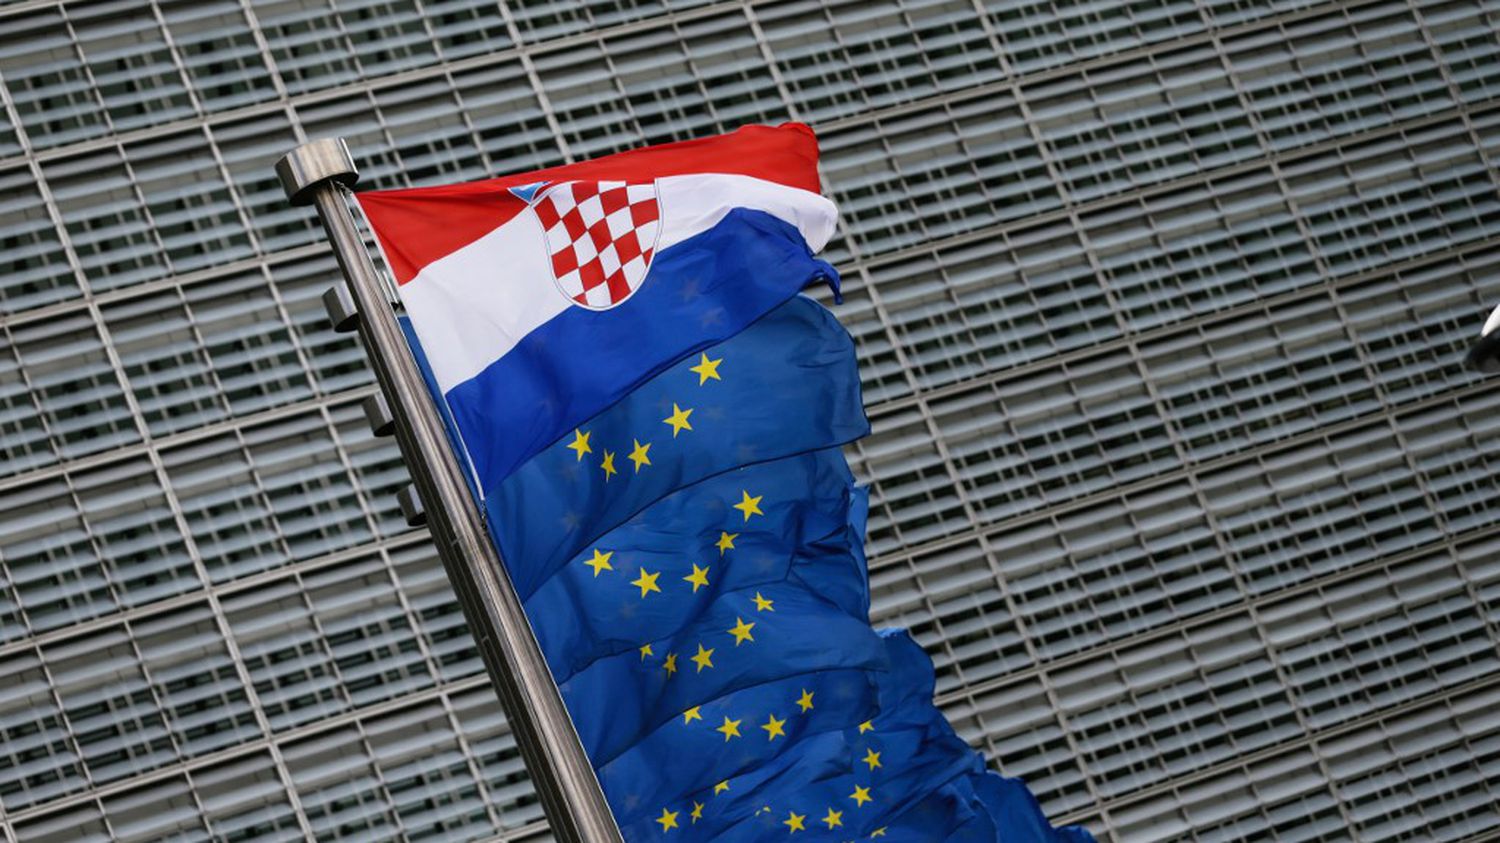 Croatia will join the Schengen area from January 1, 2023
